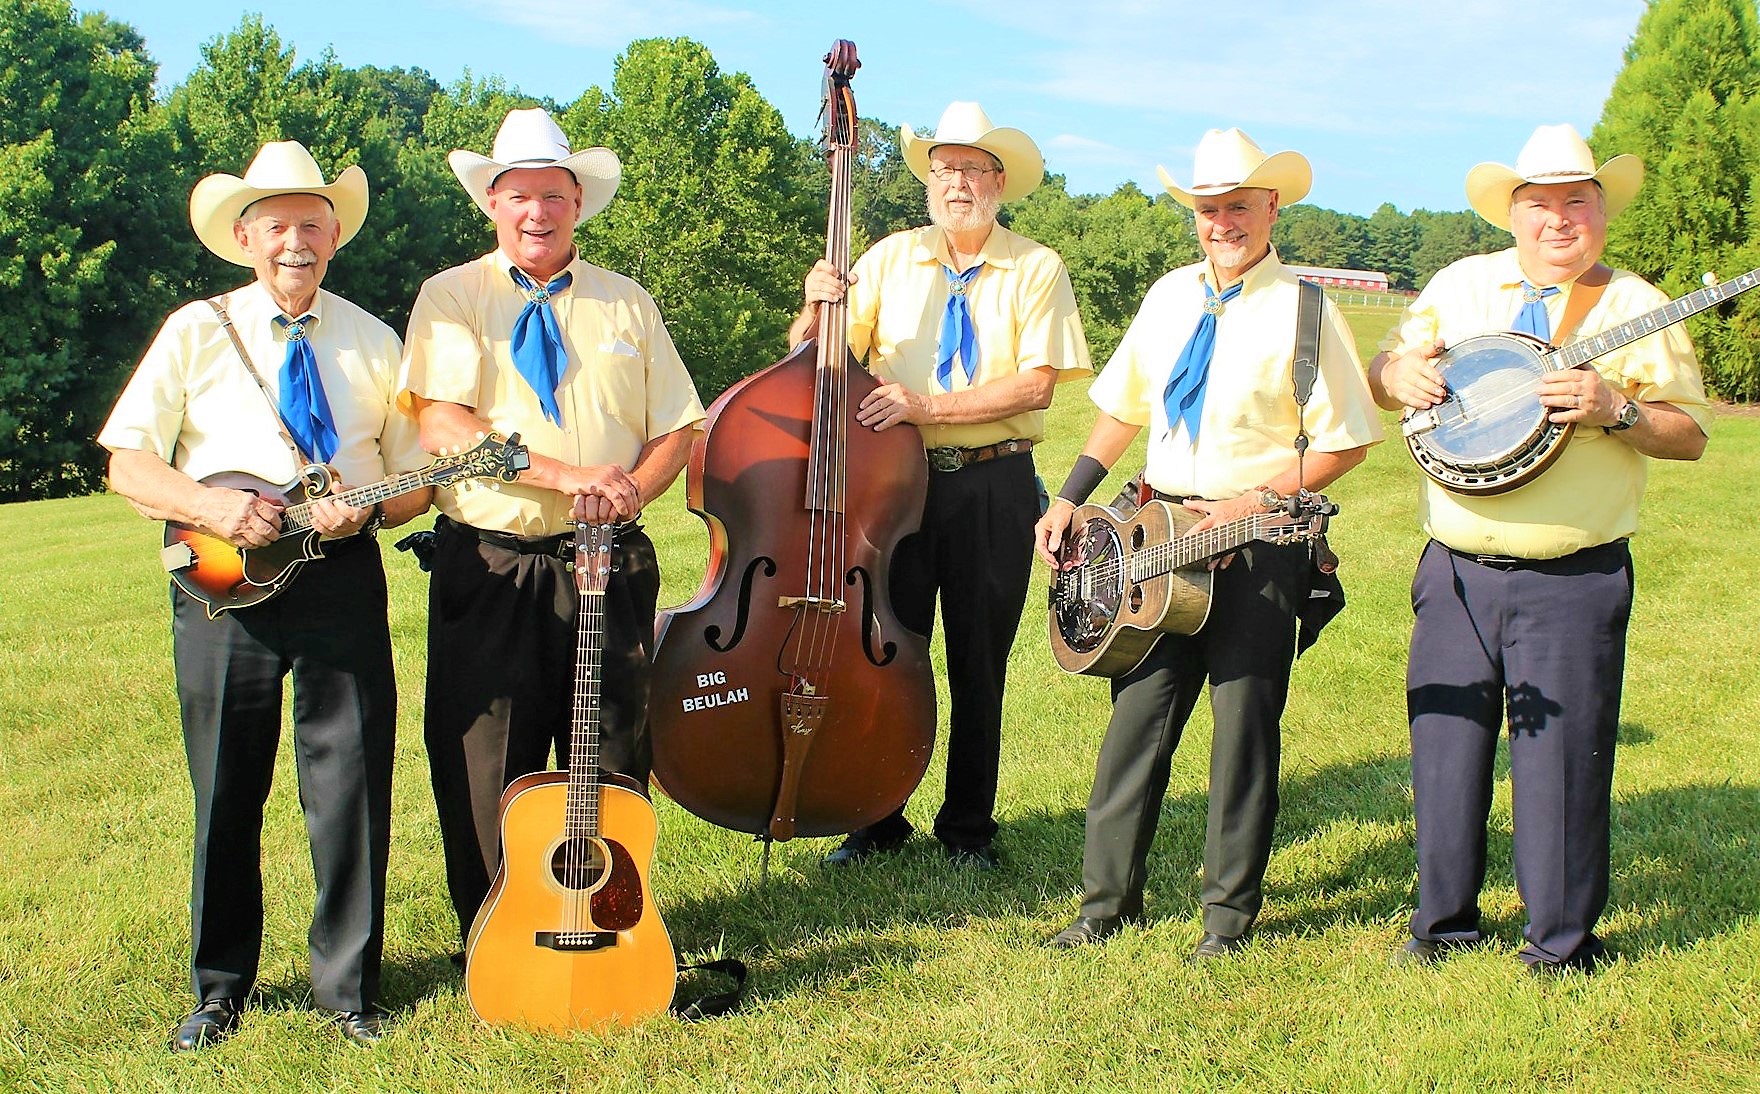 band in a box bluegrass